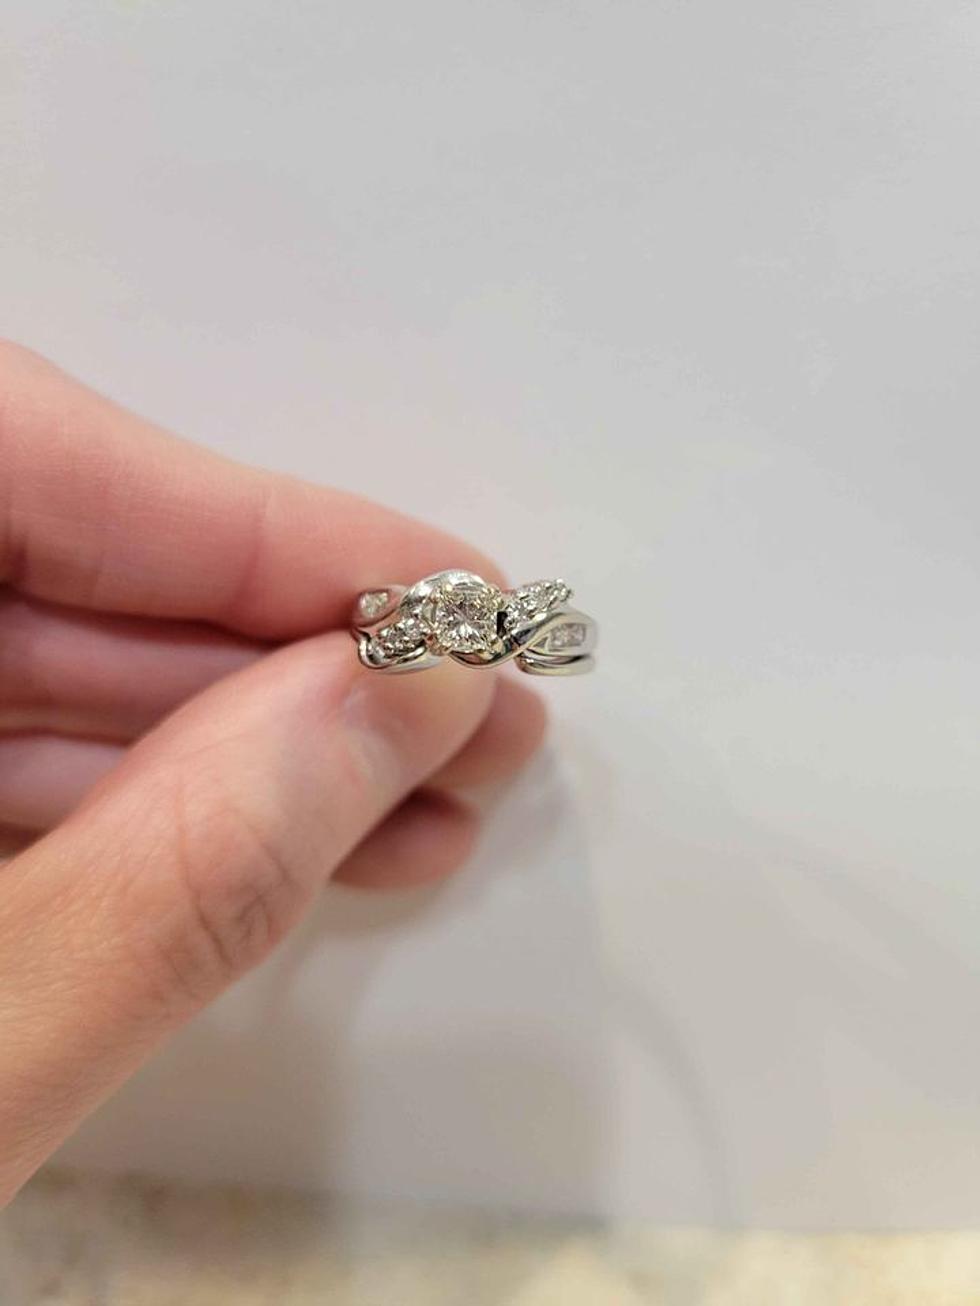 Casper Woman Selling &#8216;Totally Not Cursed Engagement Ring&#8217; on Casper Classifieds